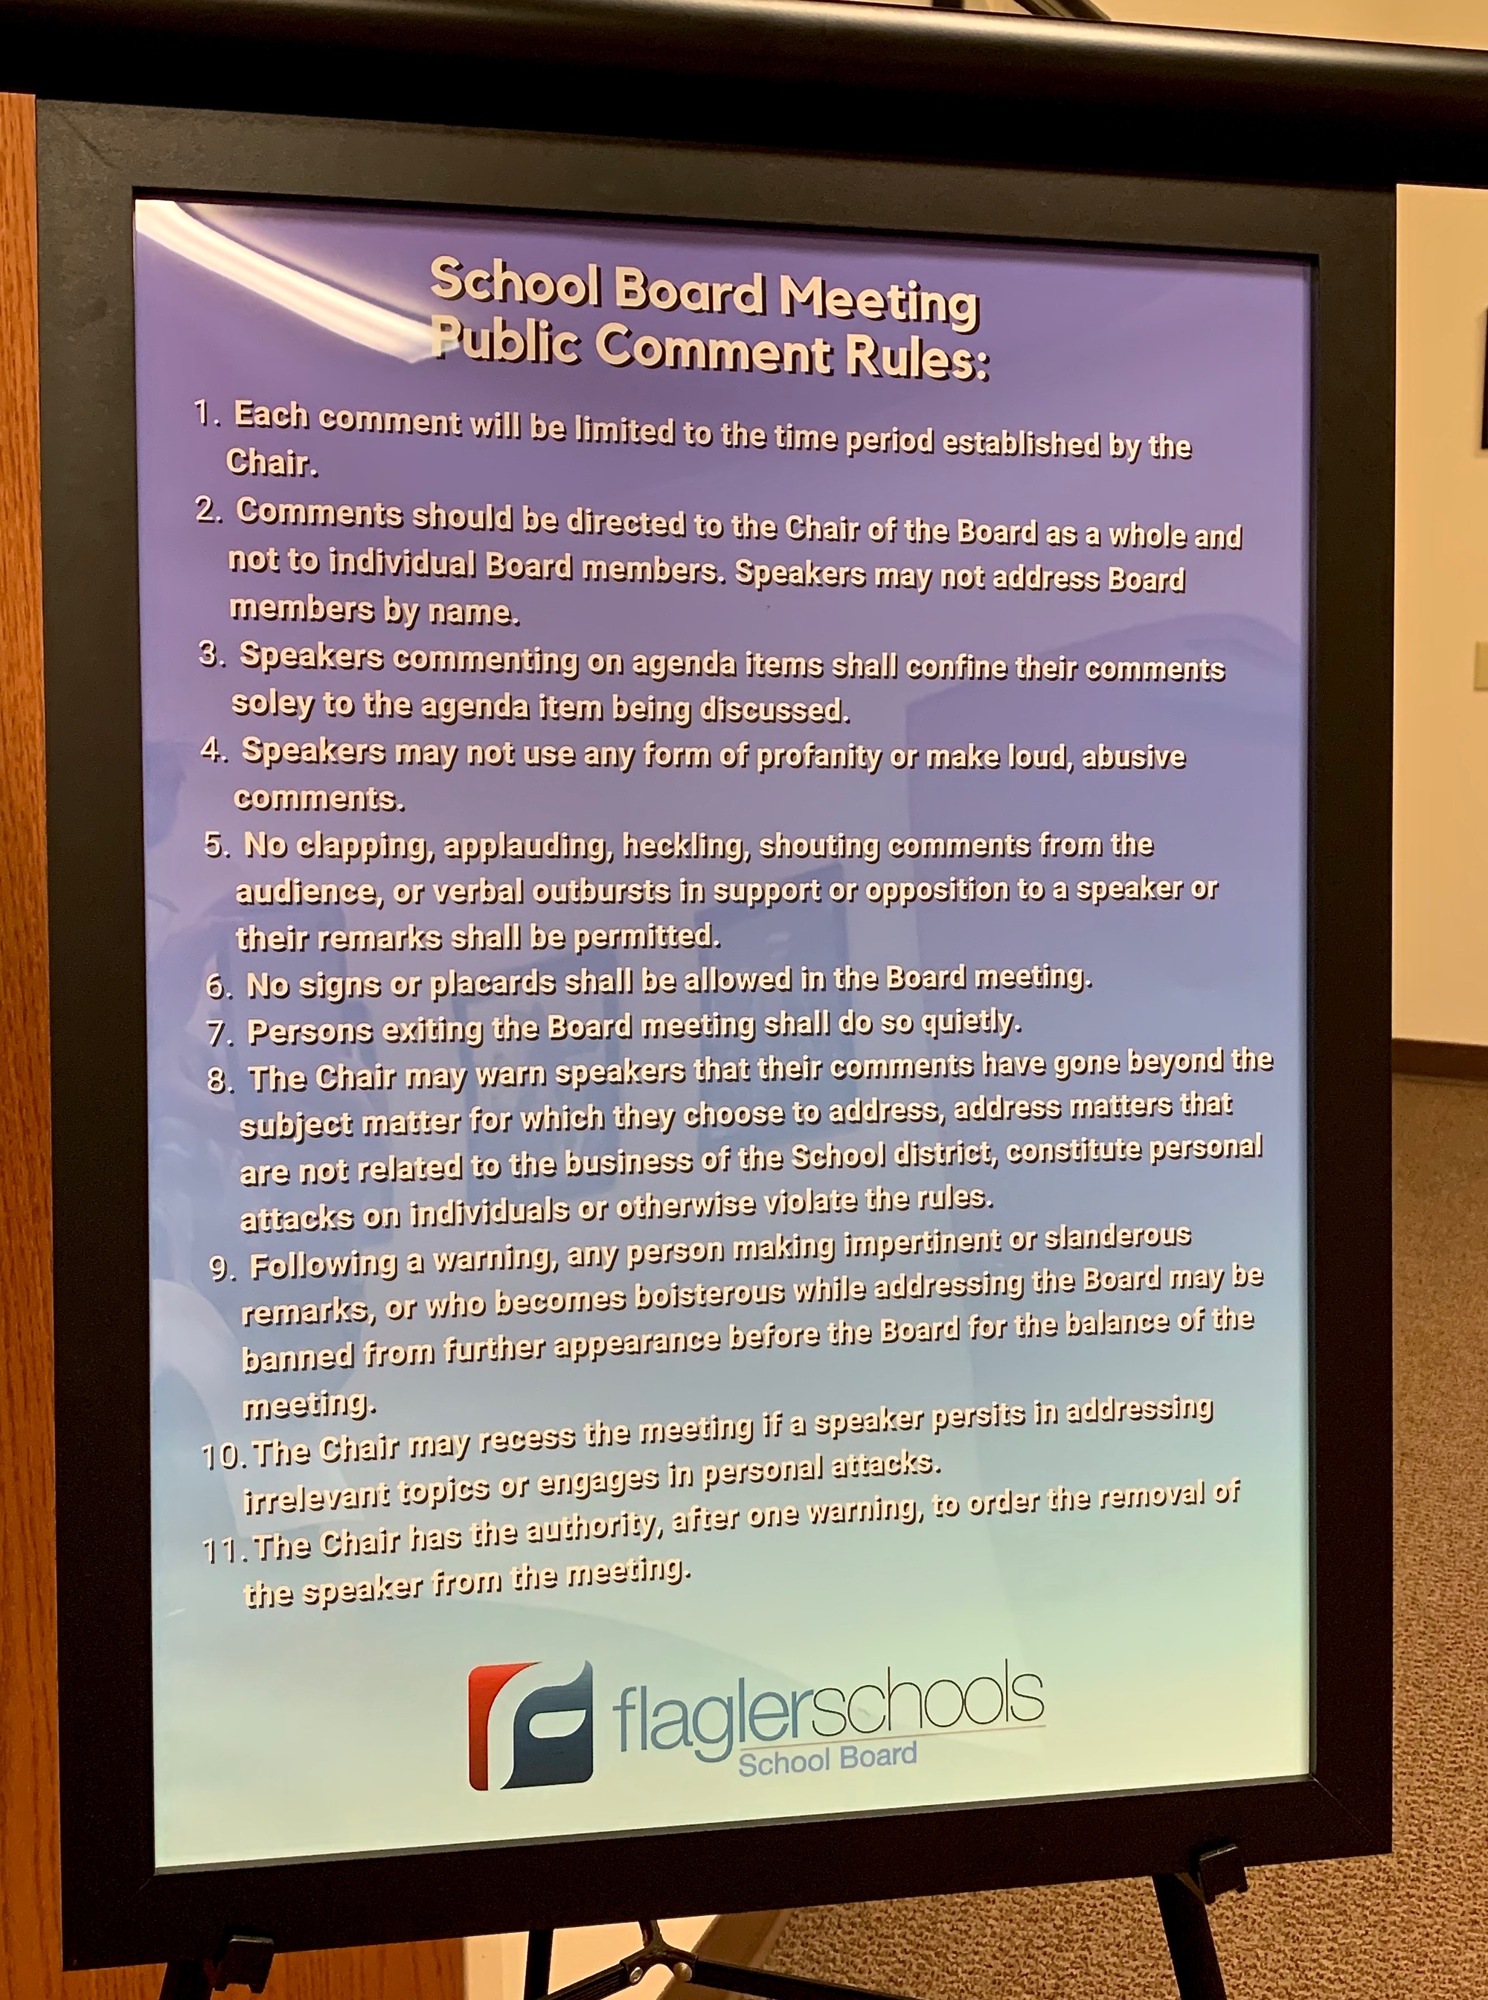 The district placed this sign outside the meeting room in which the School Board held its Feb. 4 workshop.